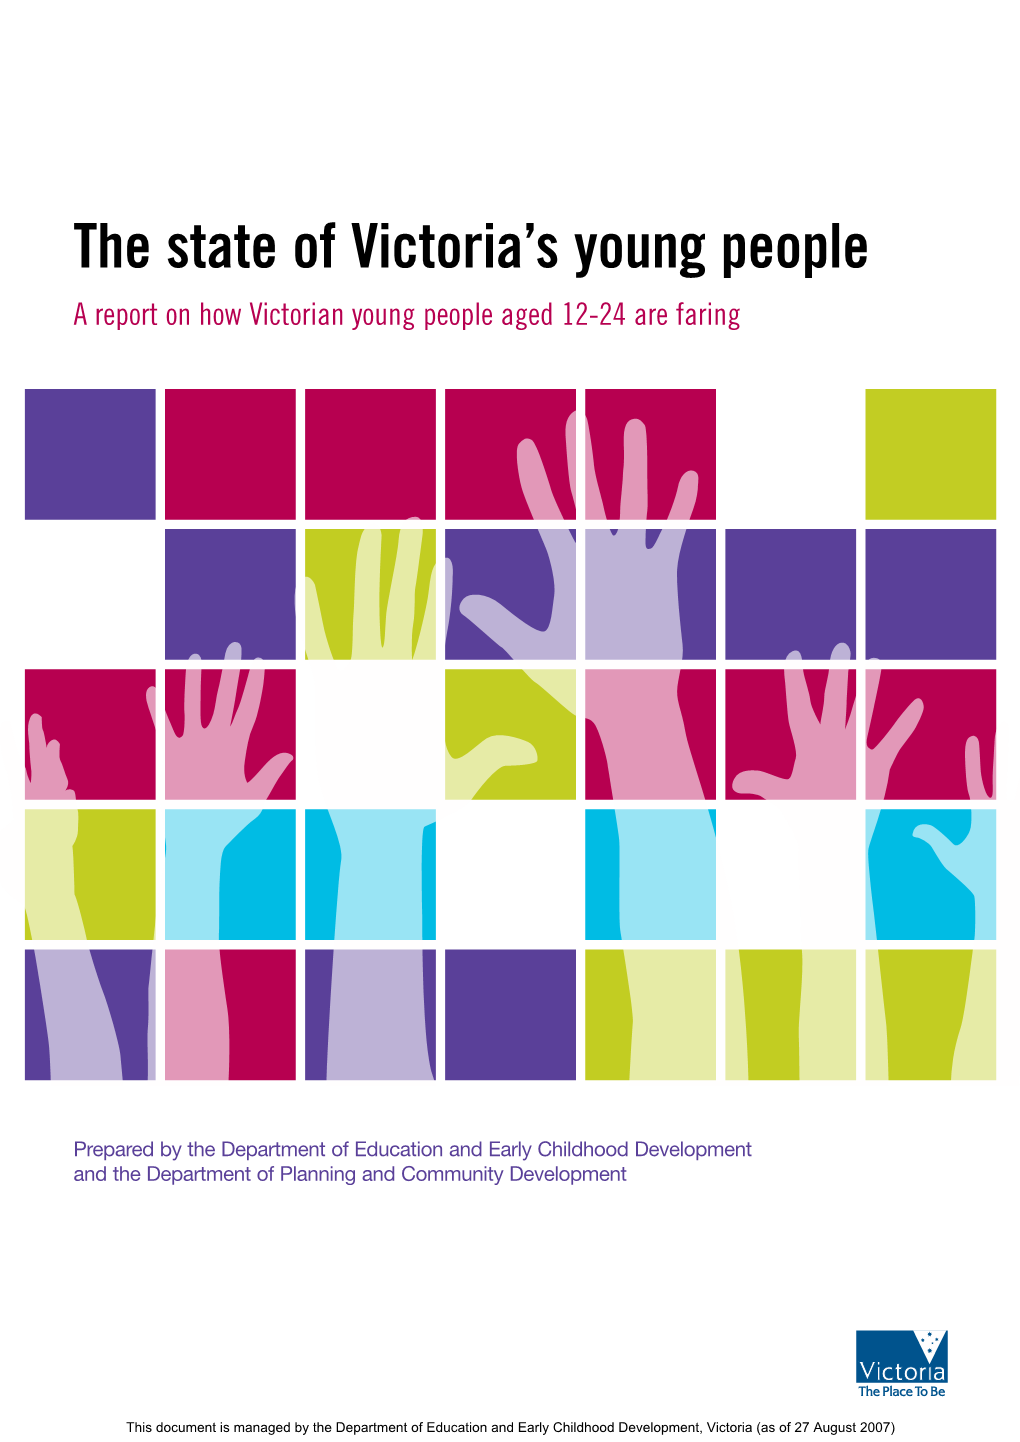 A Report on How Victorian Young People Aged 12-24 Are Faring